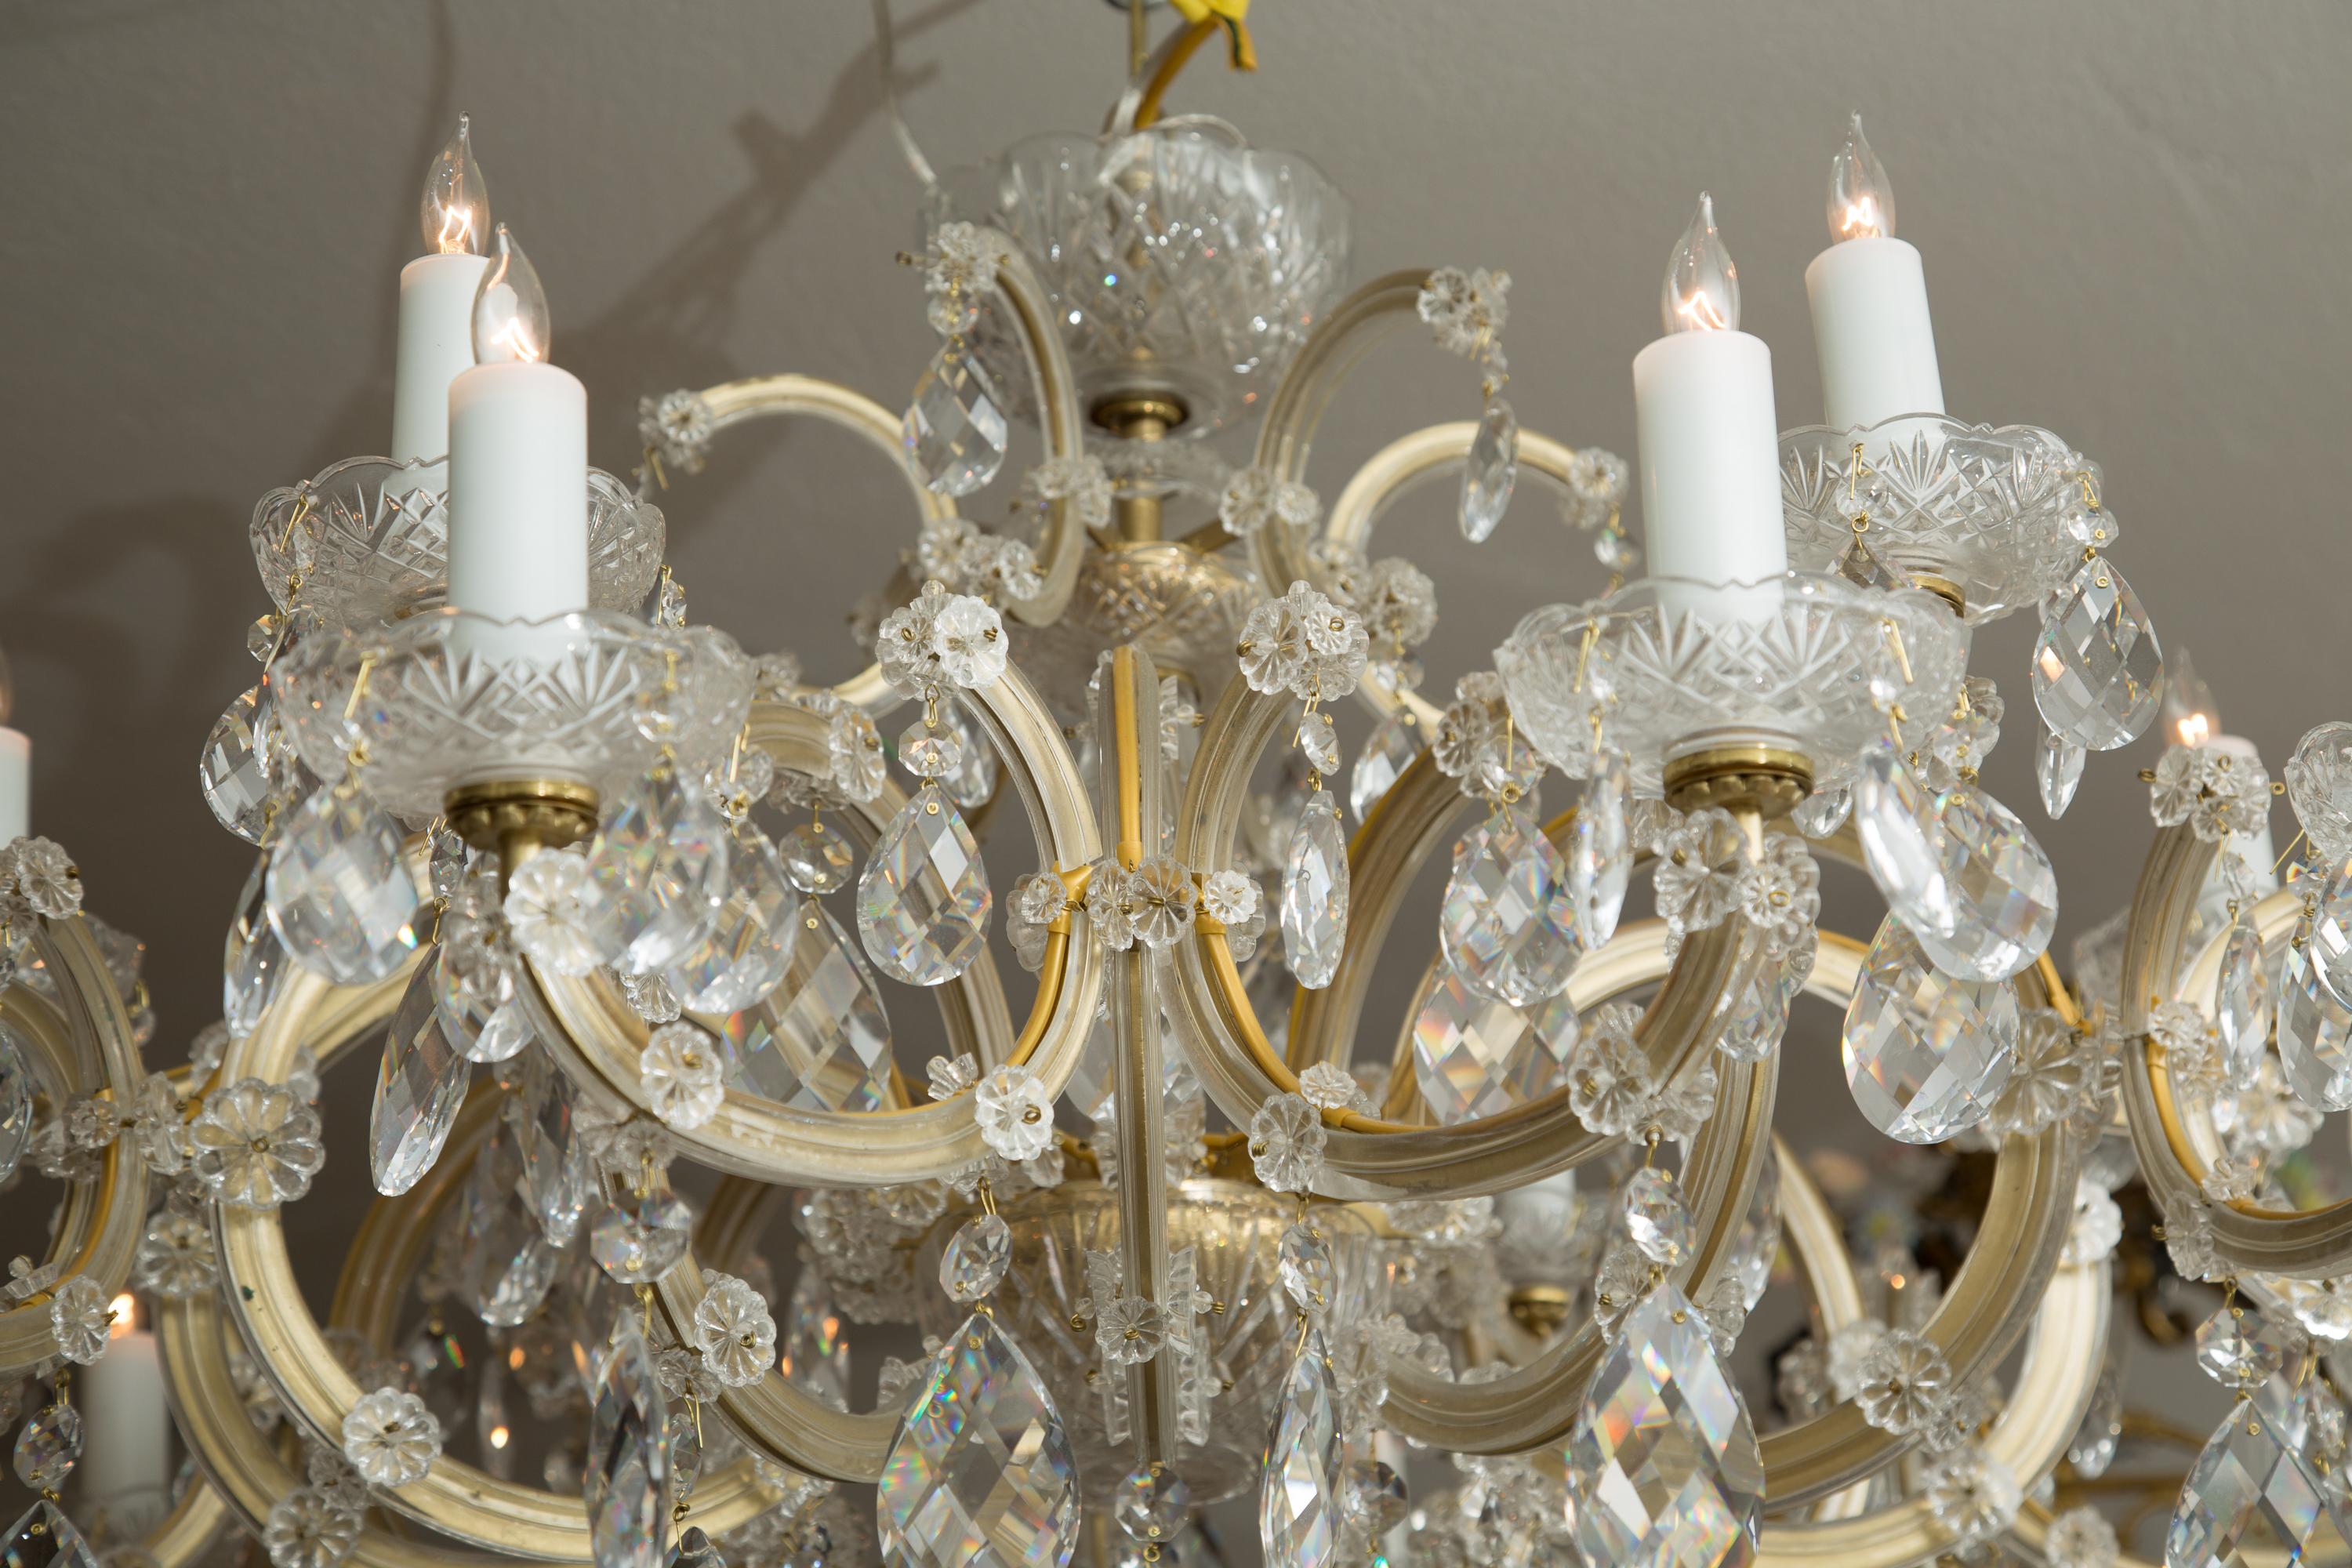 This is a classic Maria Theresa cut crystal chandelier that is shorter than most, allowing for rooms with somewhat low ceilings.